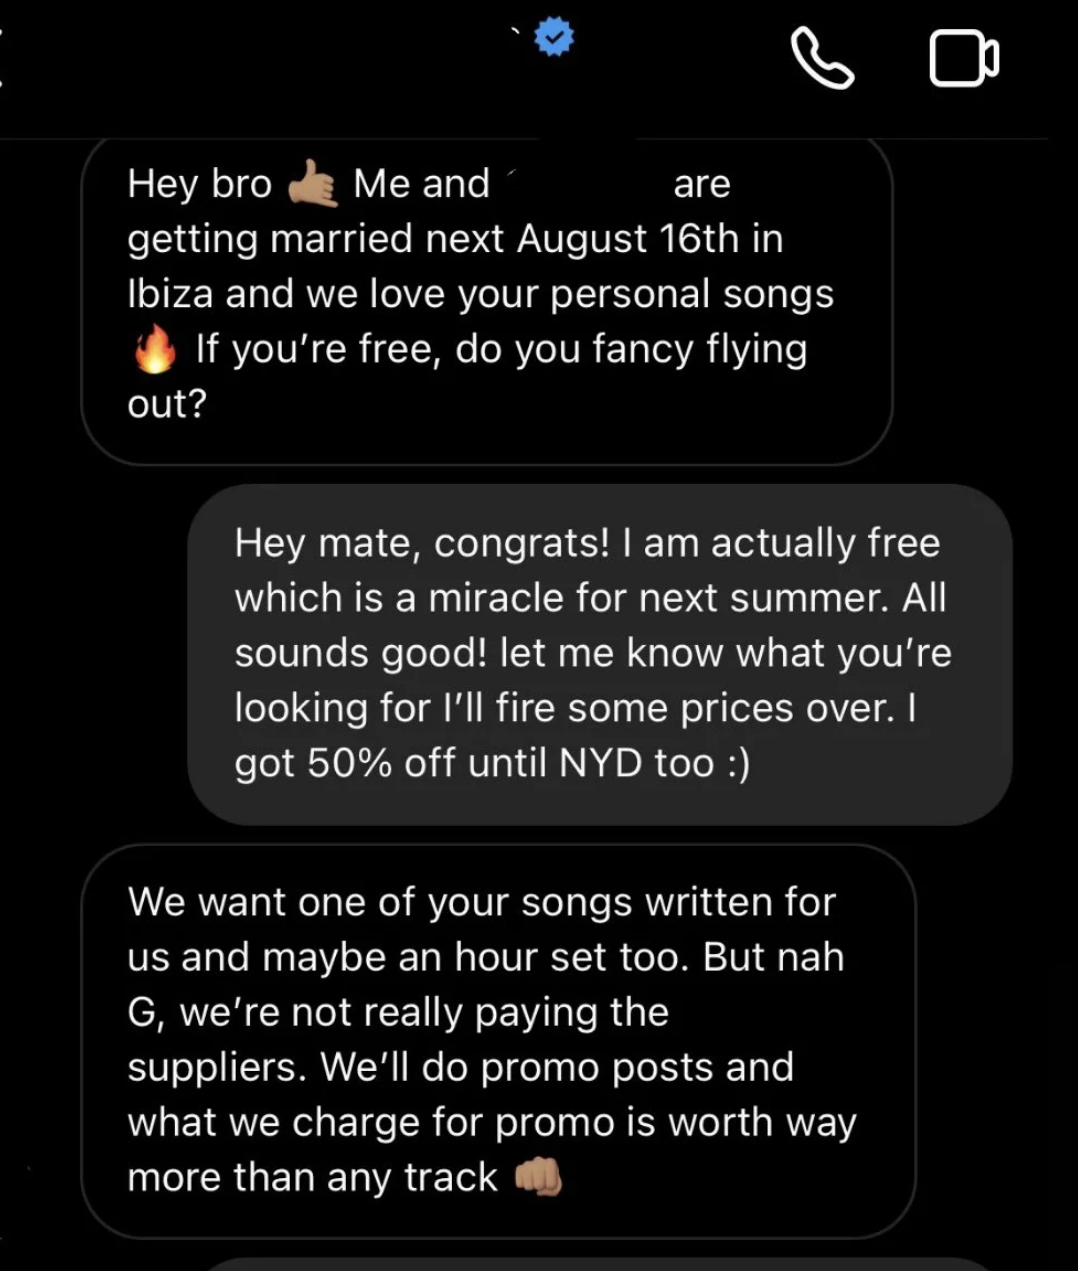 The influencer asks a musician to write a song and perform an hourlong set at their wedding, but says they won&#x27;t be paying and will do promo social media posts instead